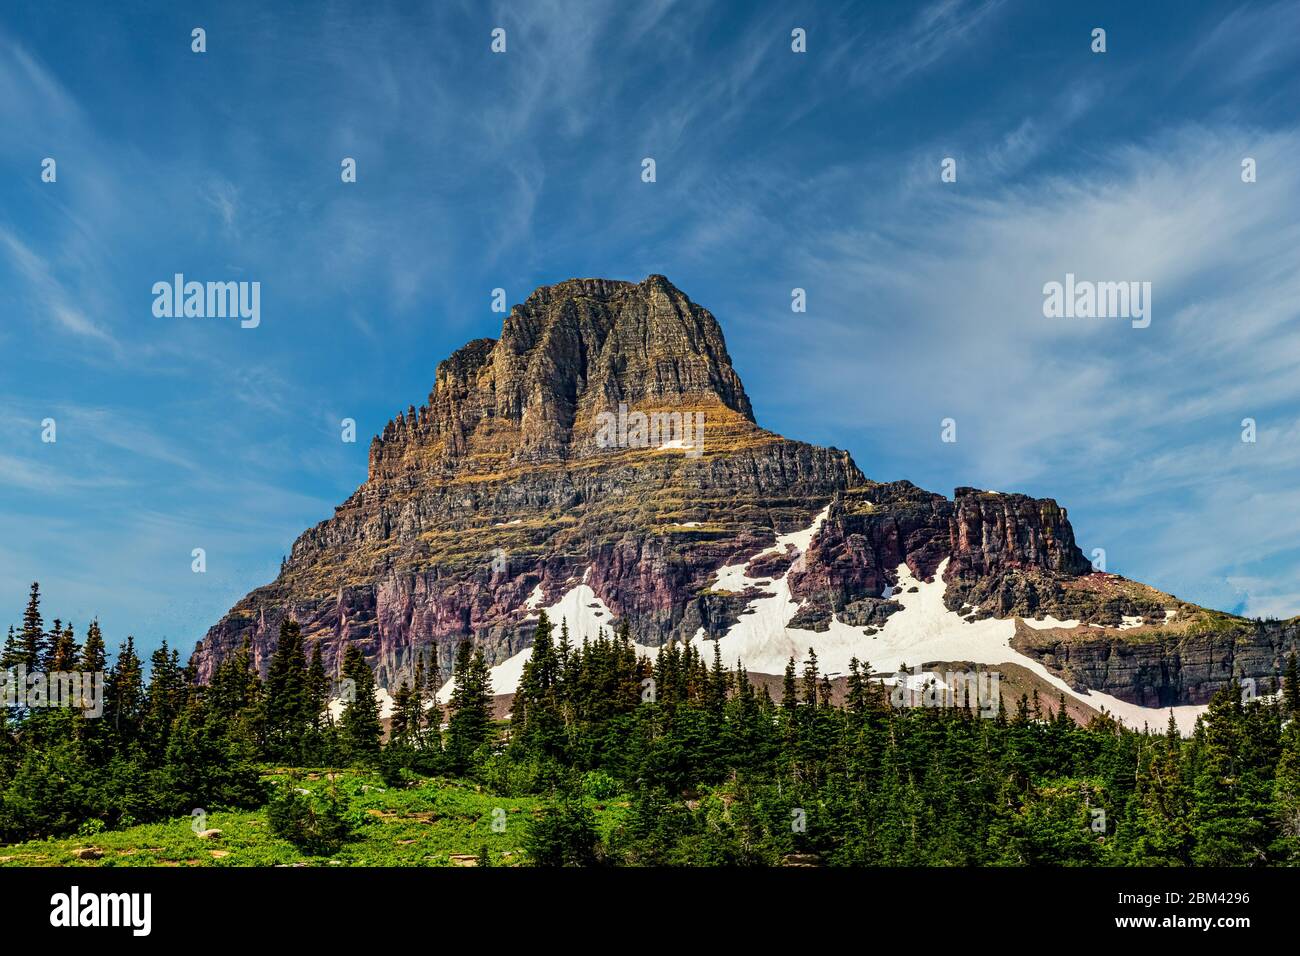 4836 Sunny day with wispy clouds in a blue sky above Clements Mountain. Viewed from the High Line Trail at Glacier National Park - Montana Stock Photo